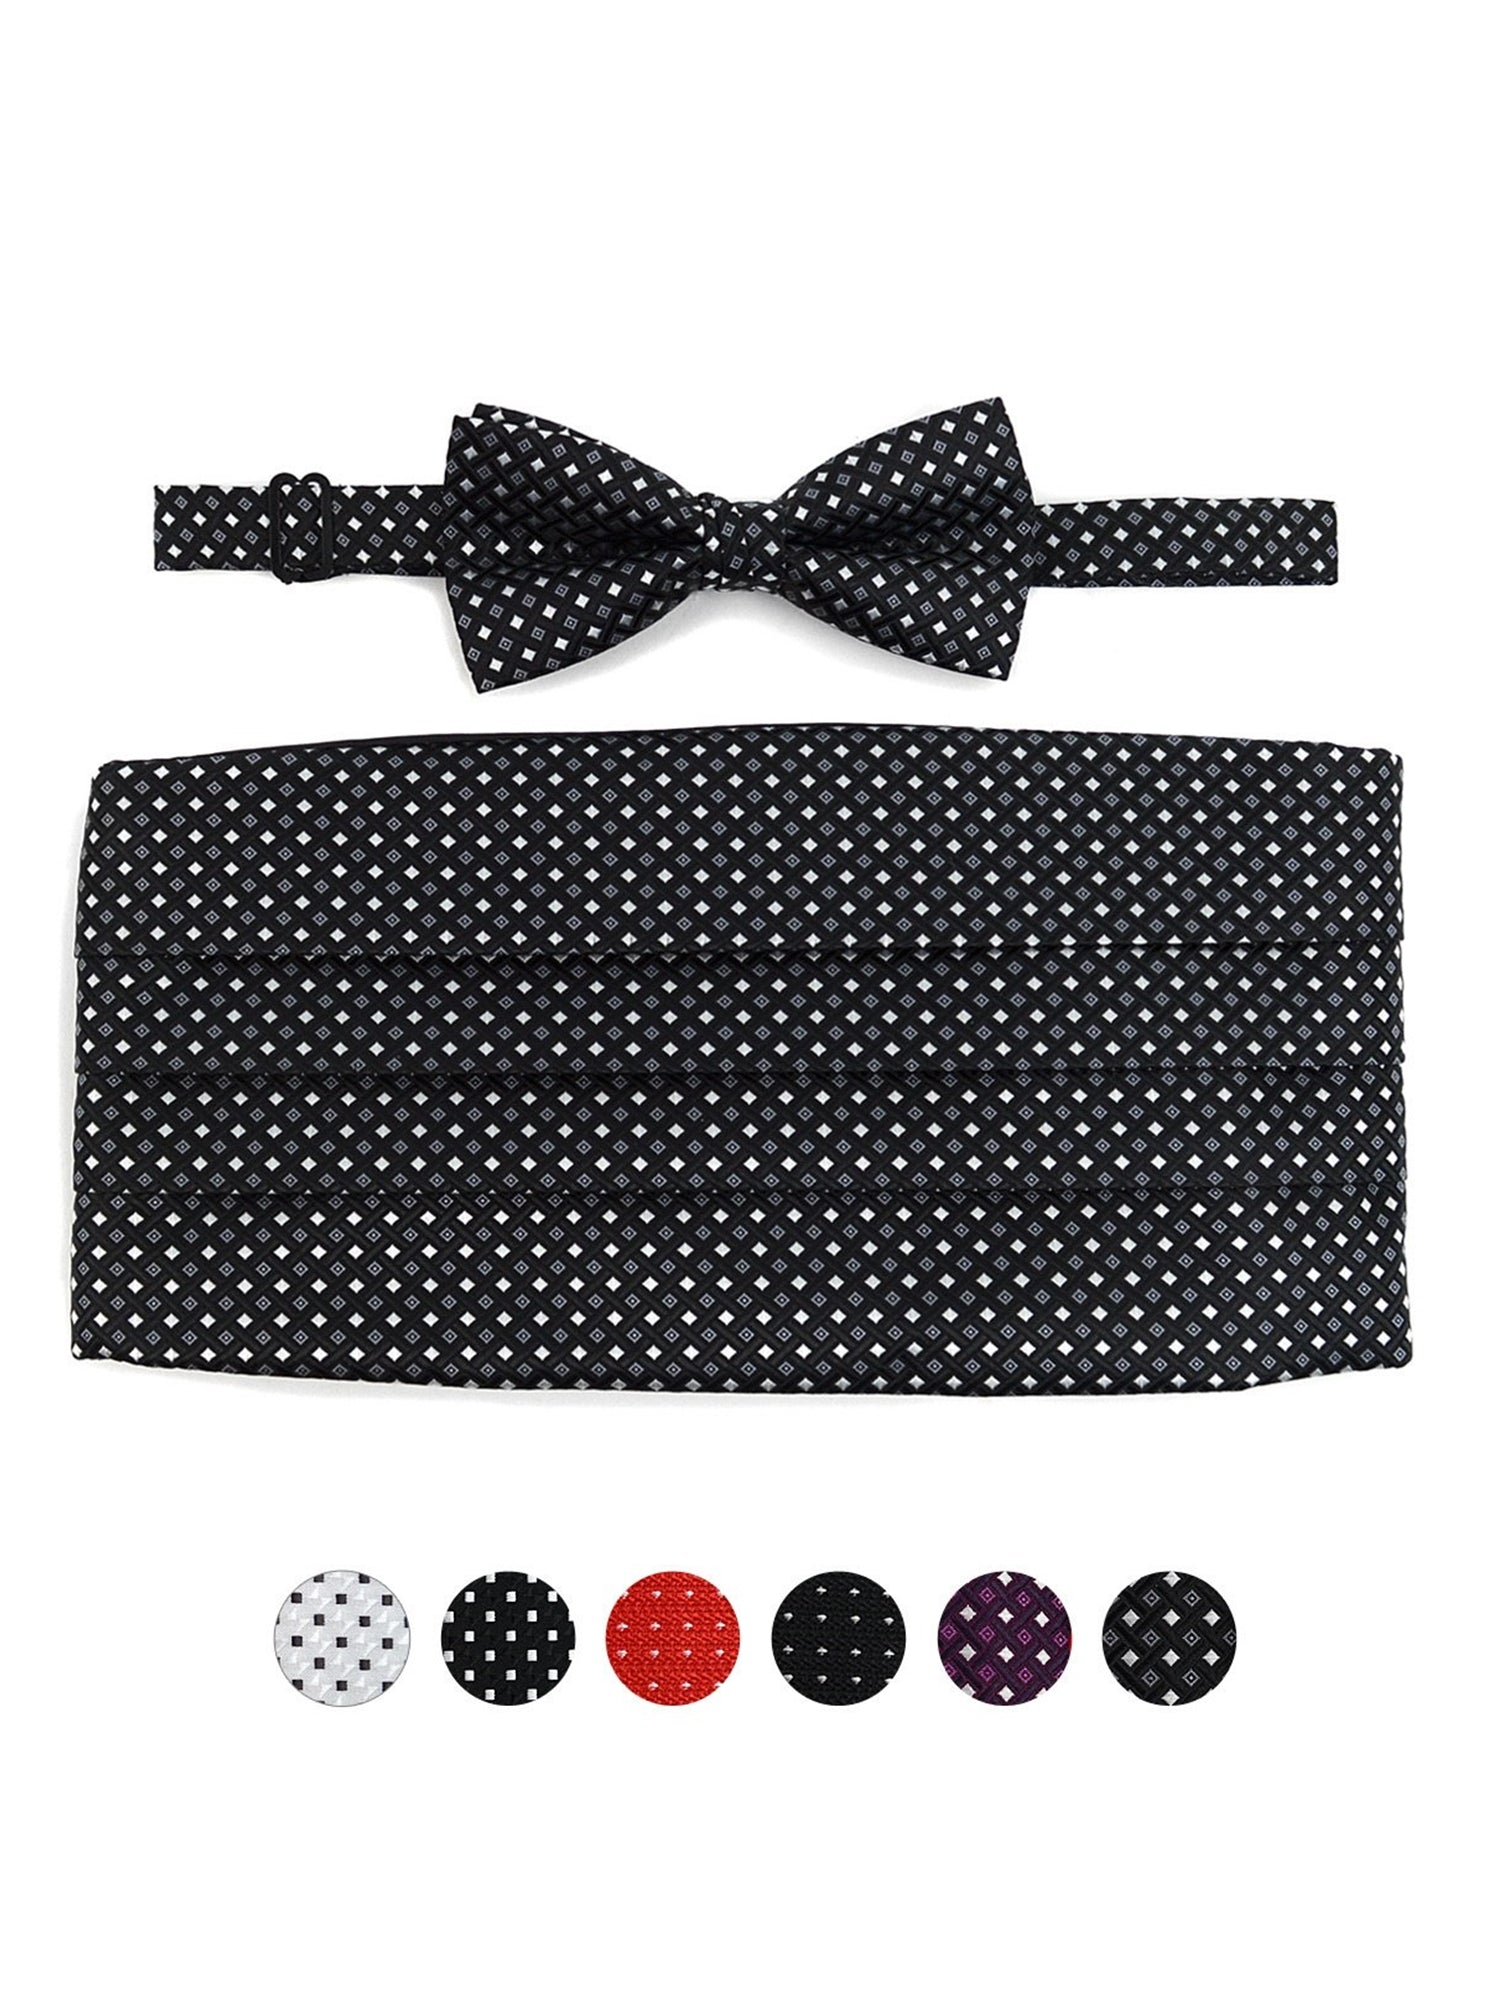 Men's Dotted Matching Adjustable Cummerbund and Bow tie Set Men's Solid Color Bow Tie TheDapperTie   